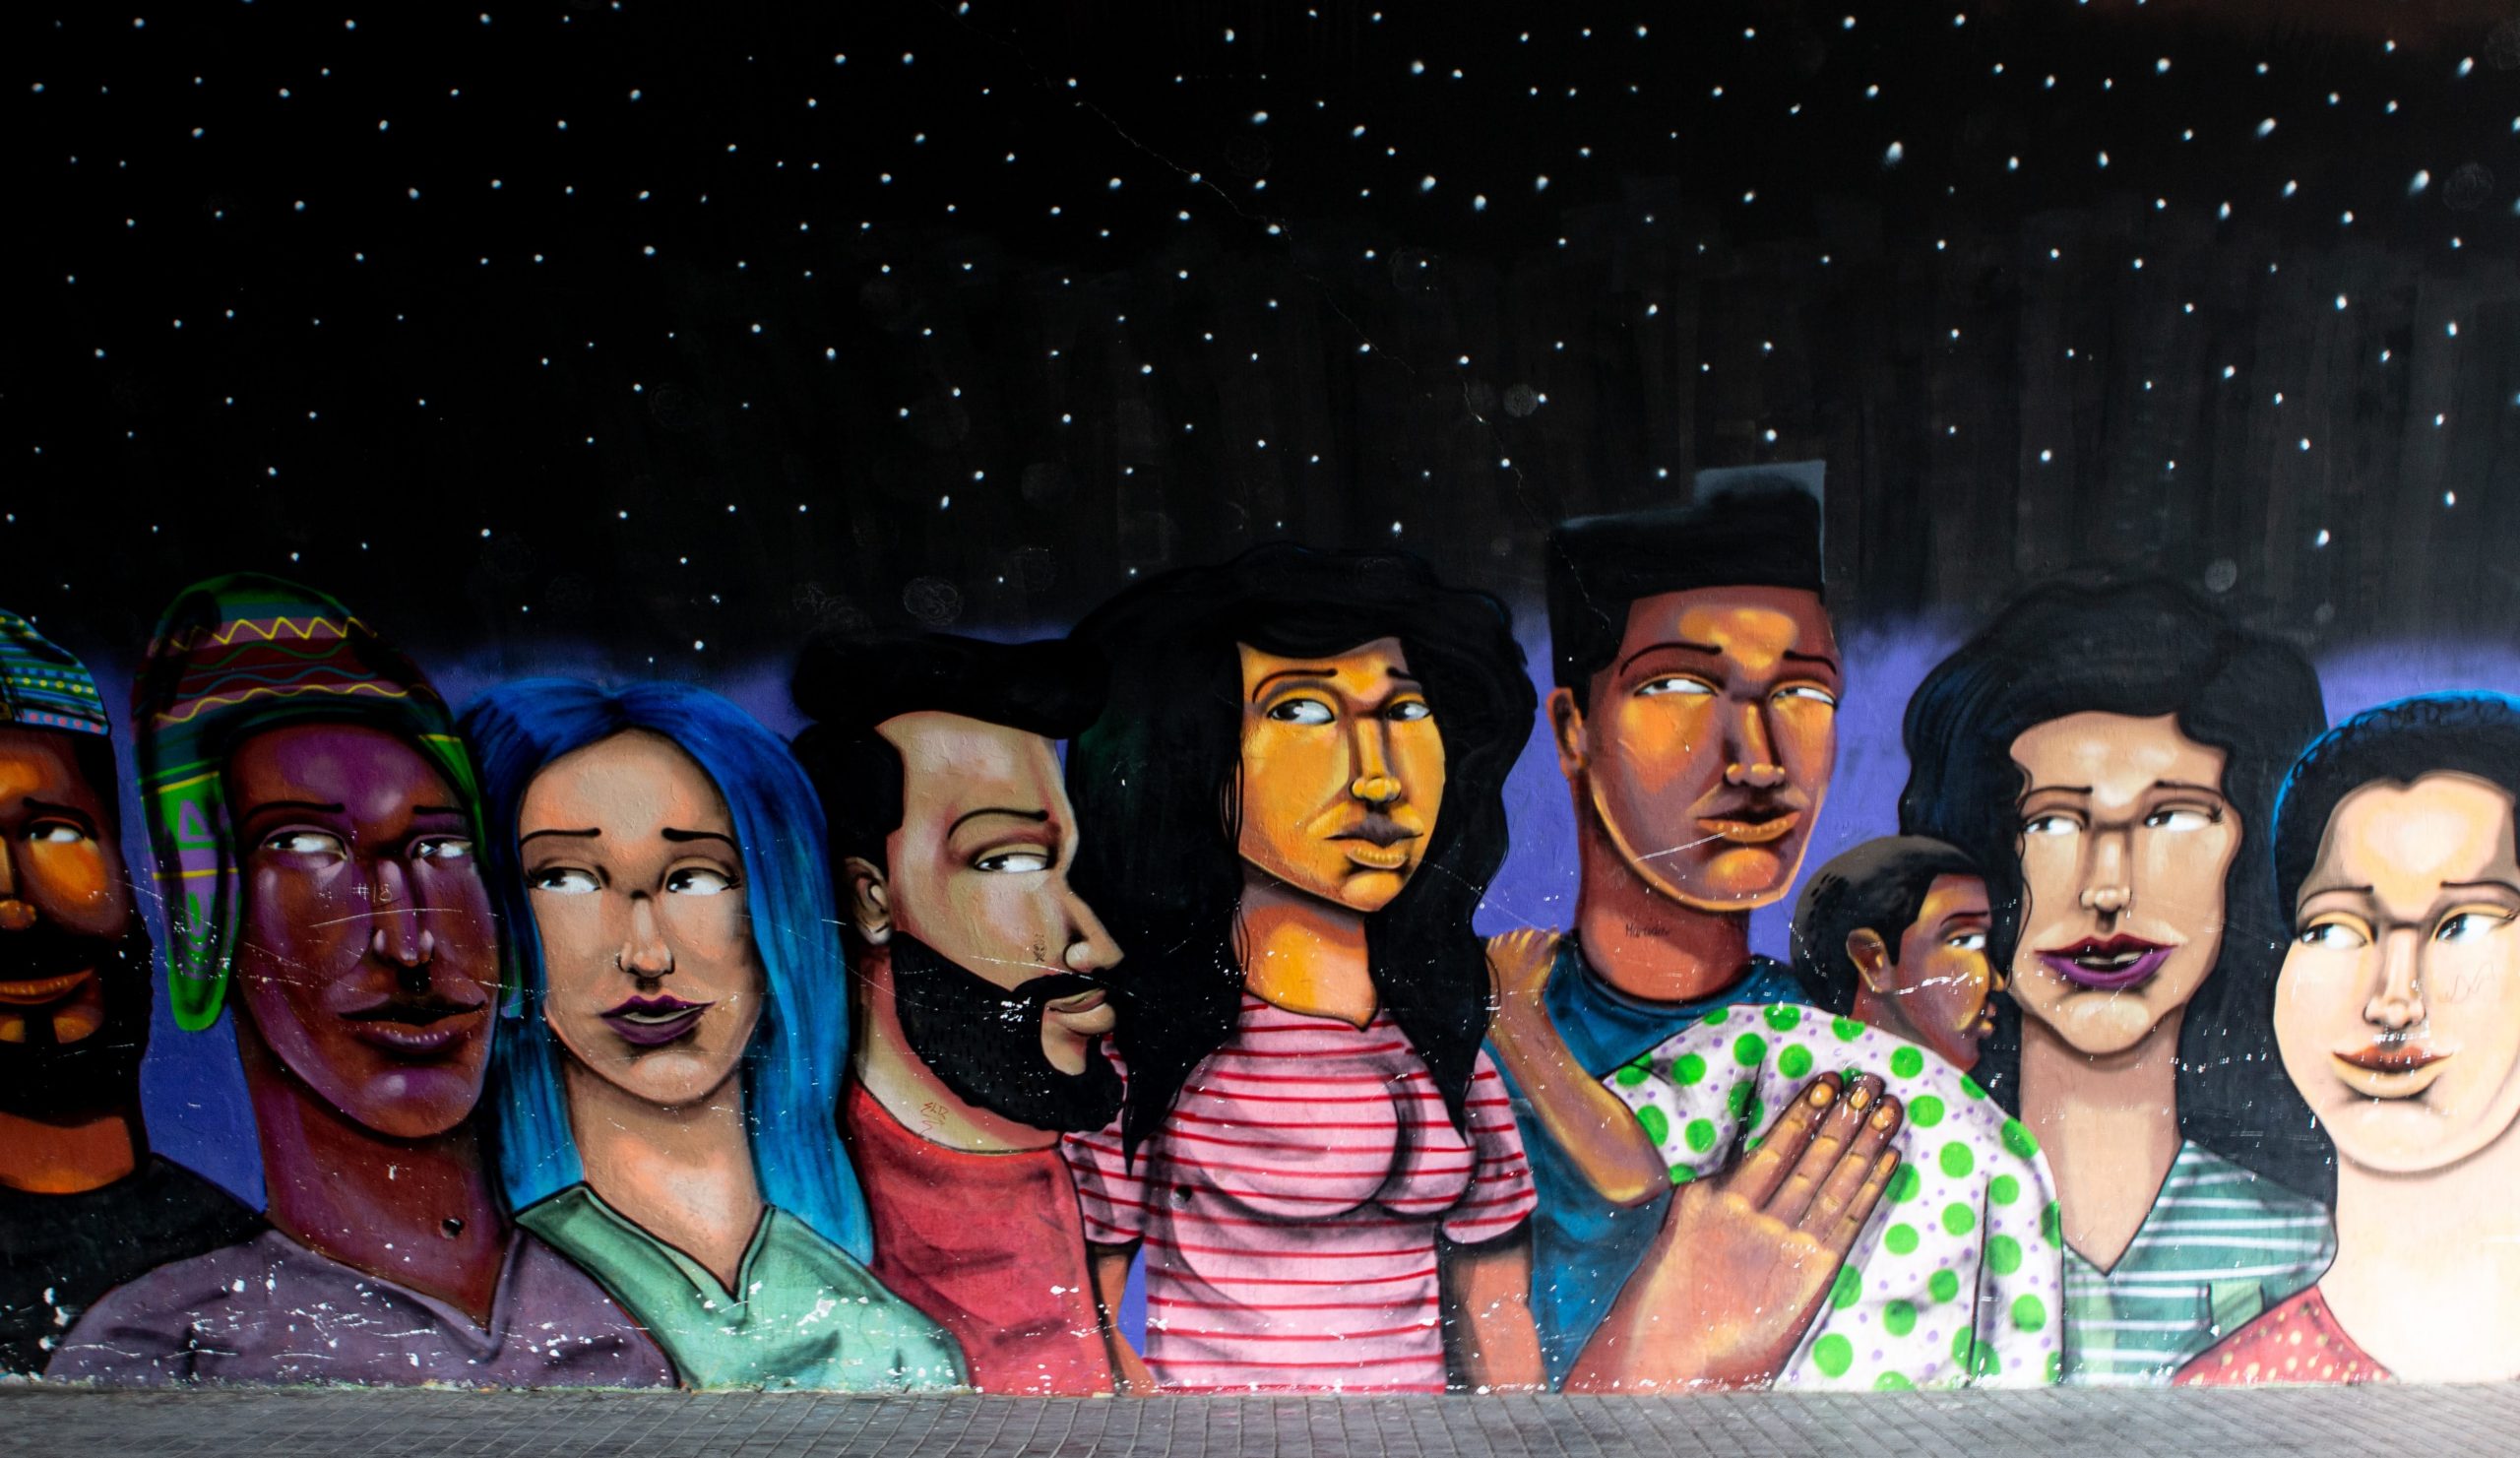 A mural of a diverse group of people